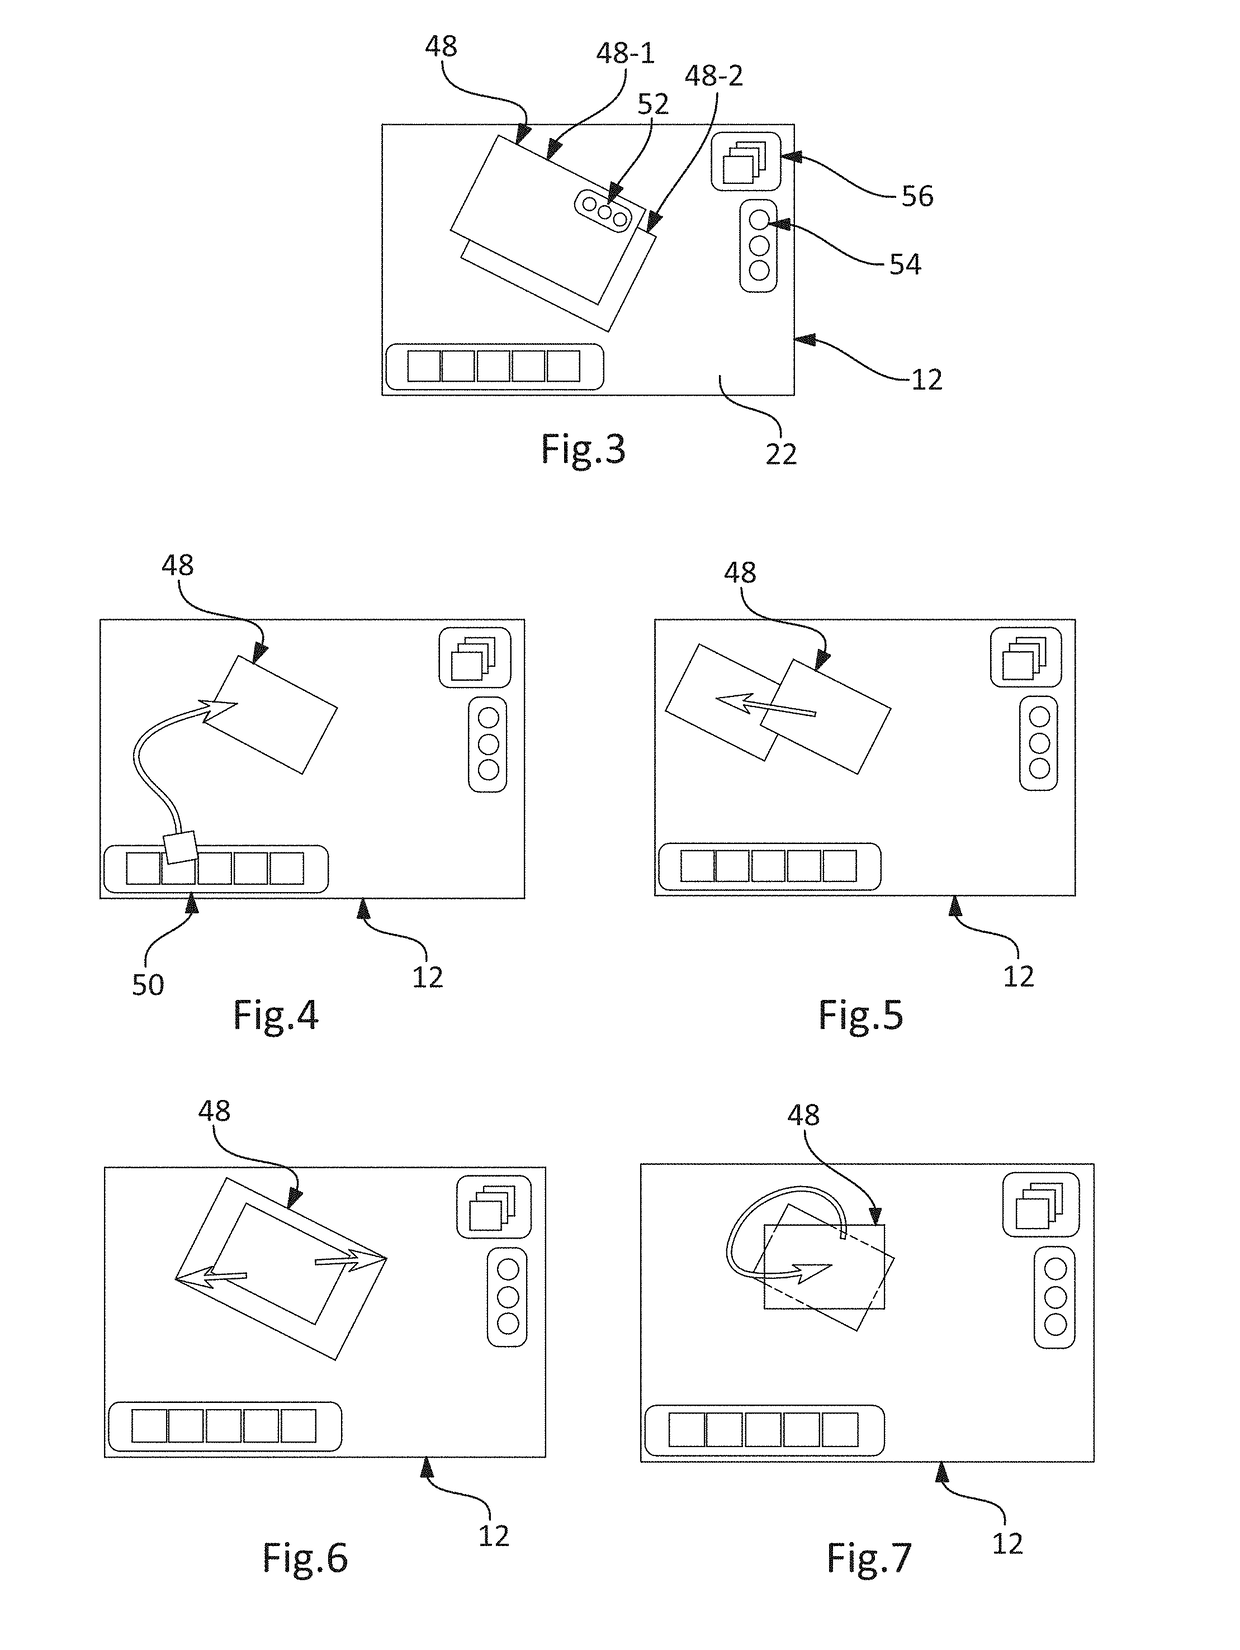 Device and method for visual sharing of data